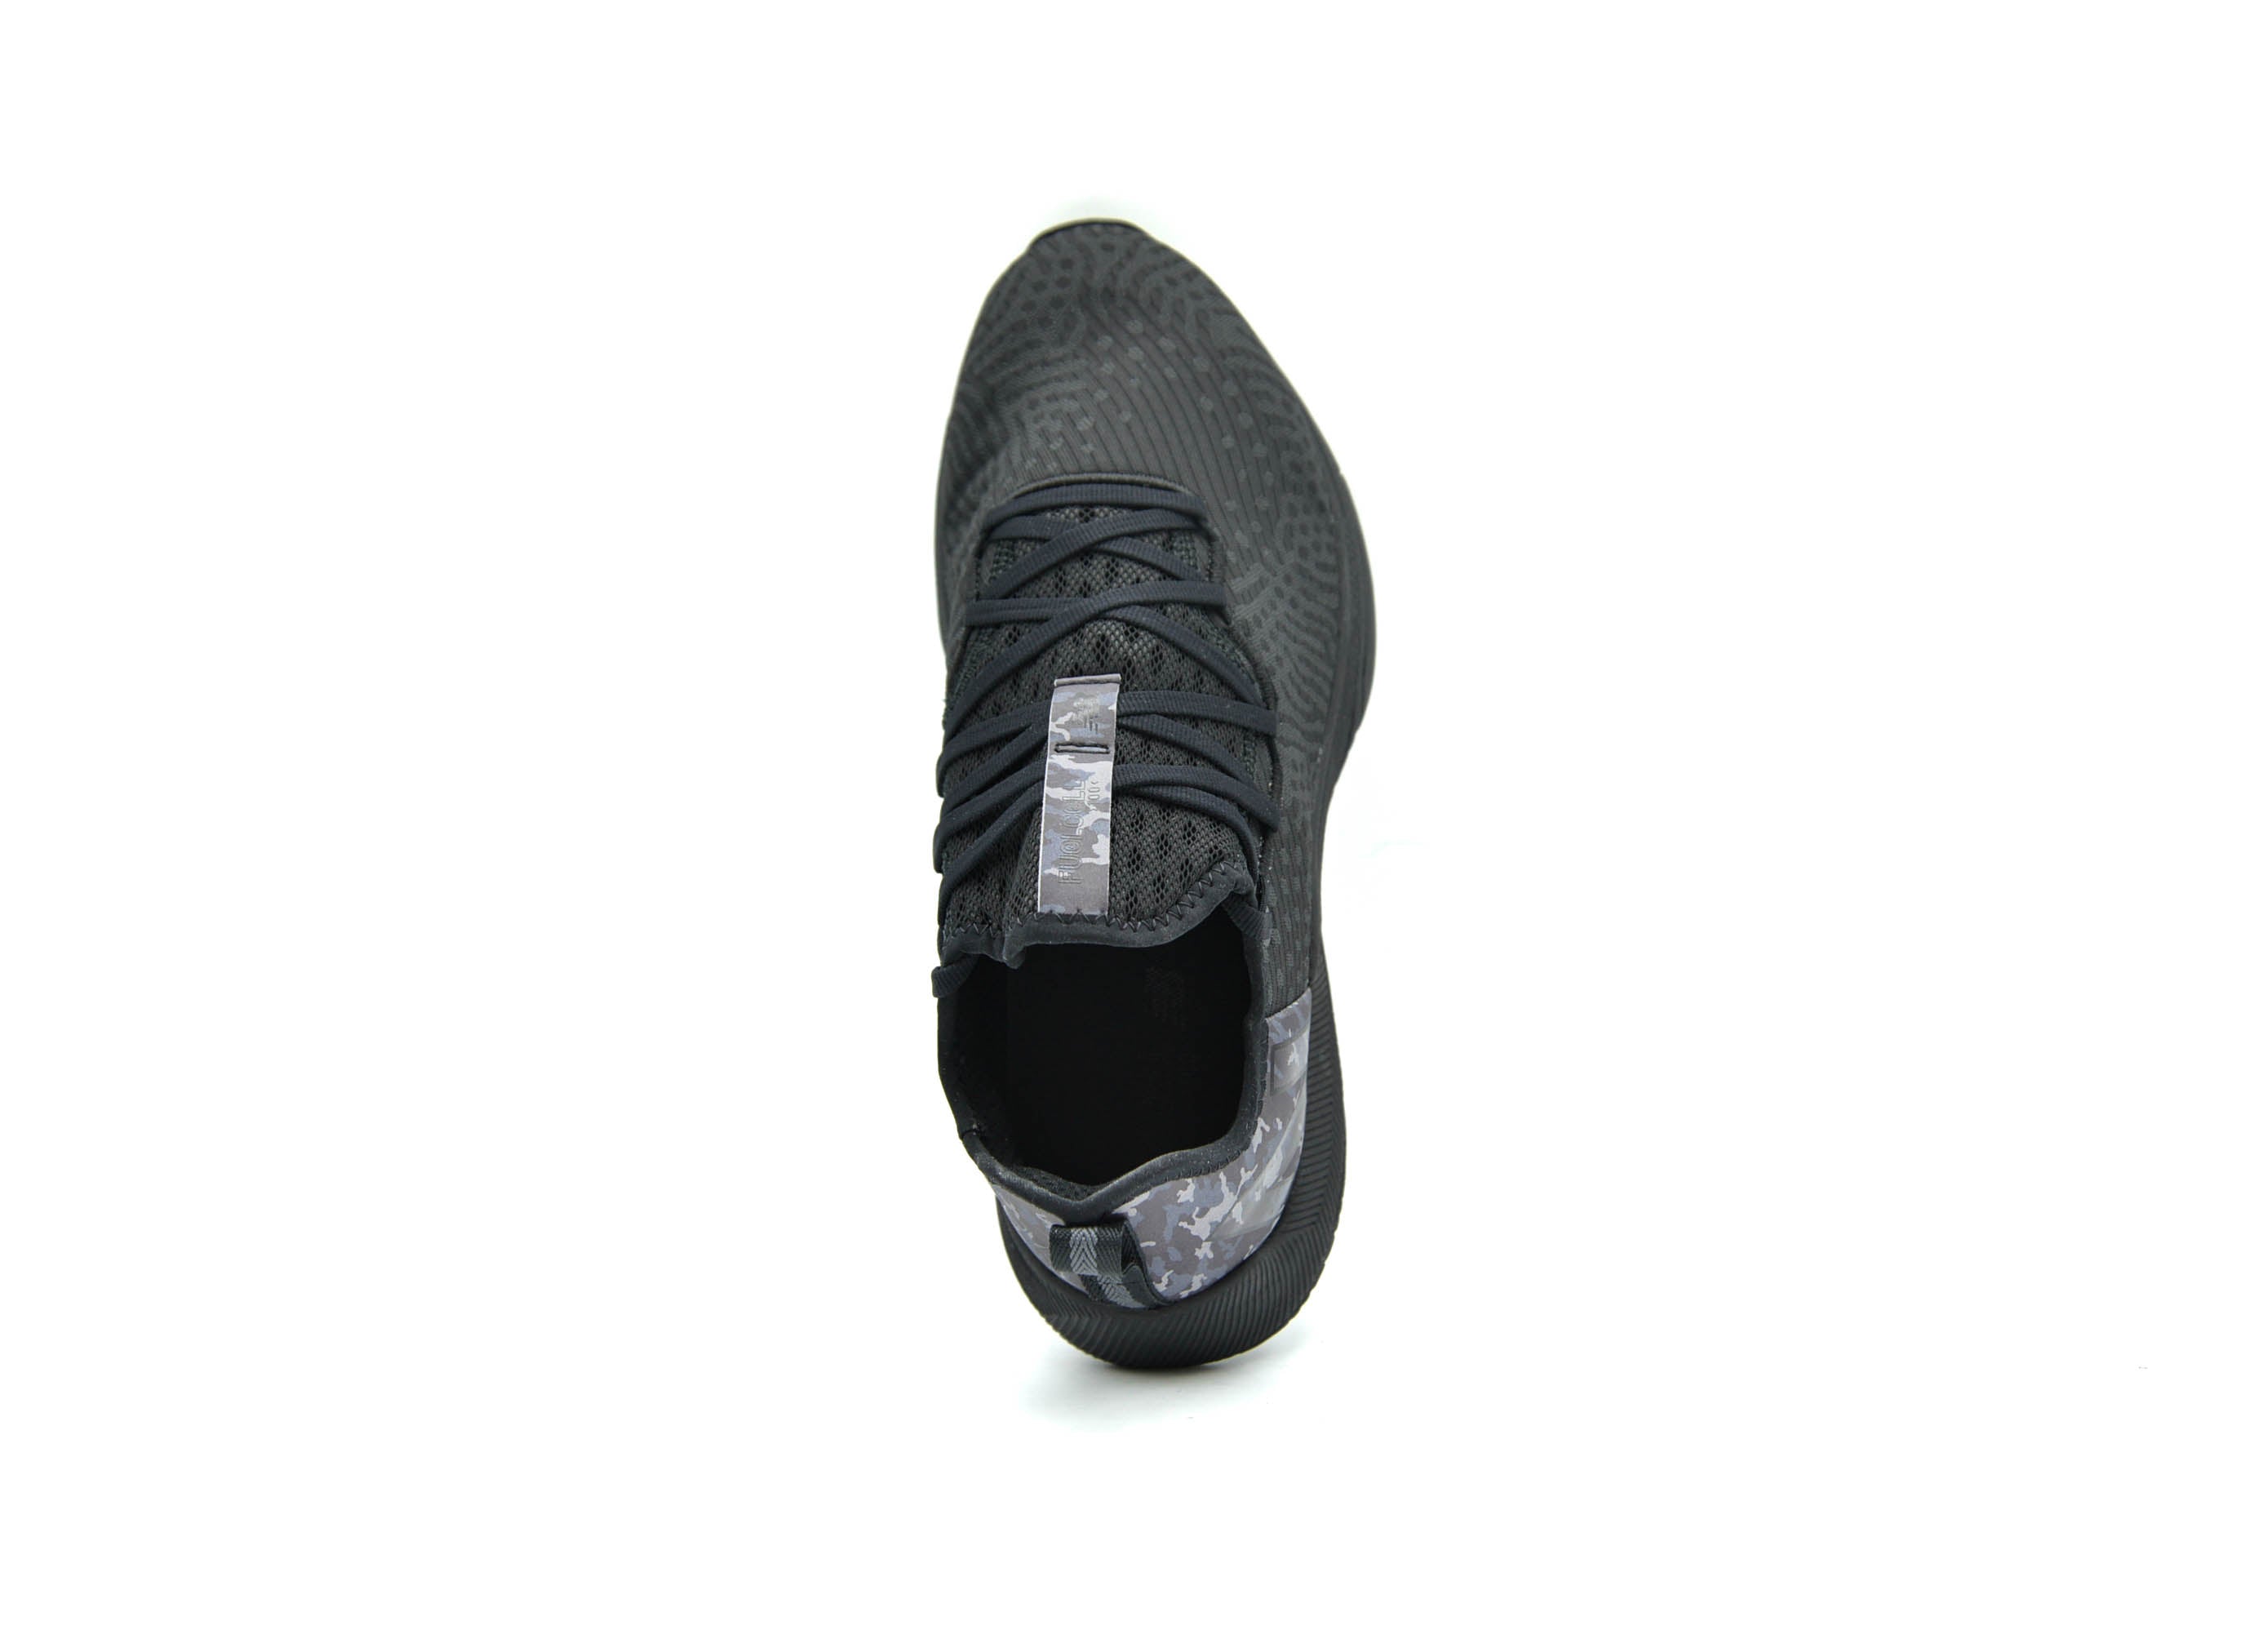 NEW BALANCE FUELCELL TRAINERS 100